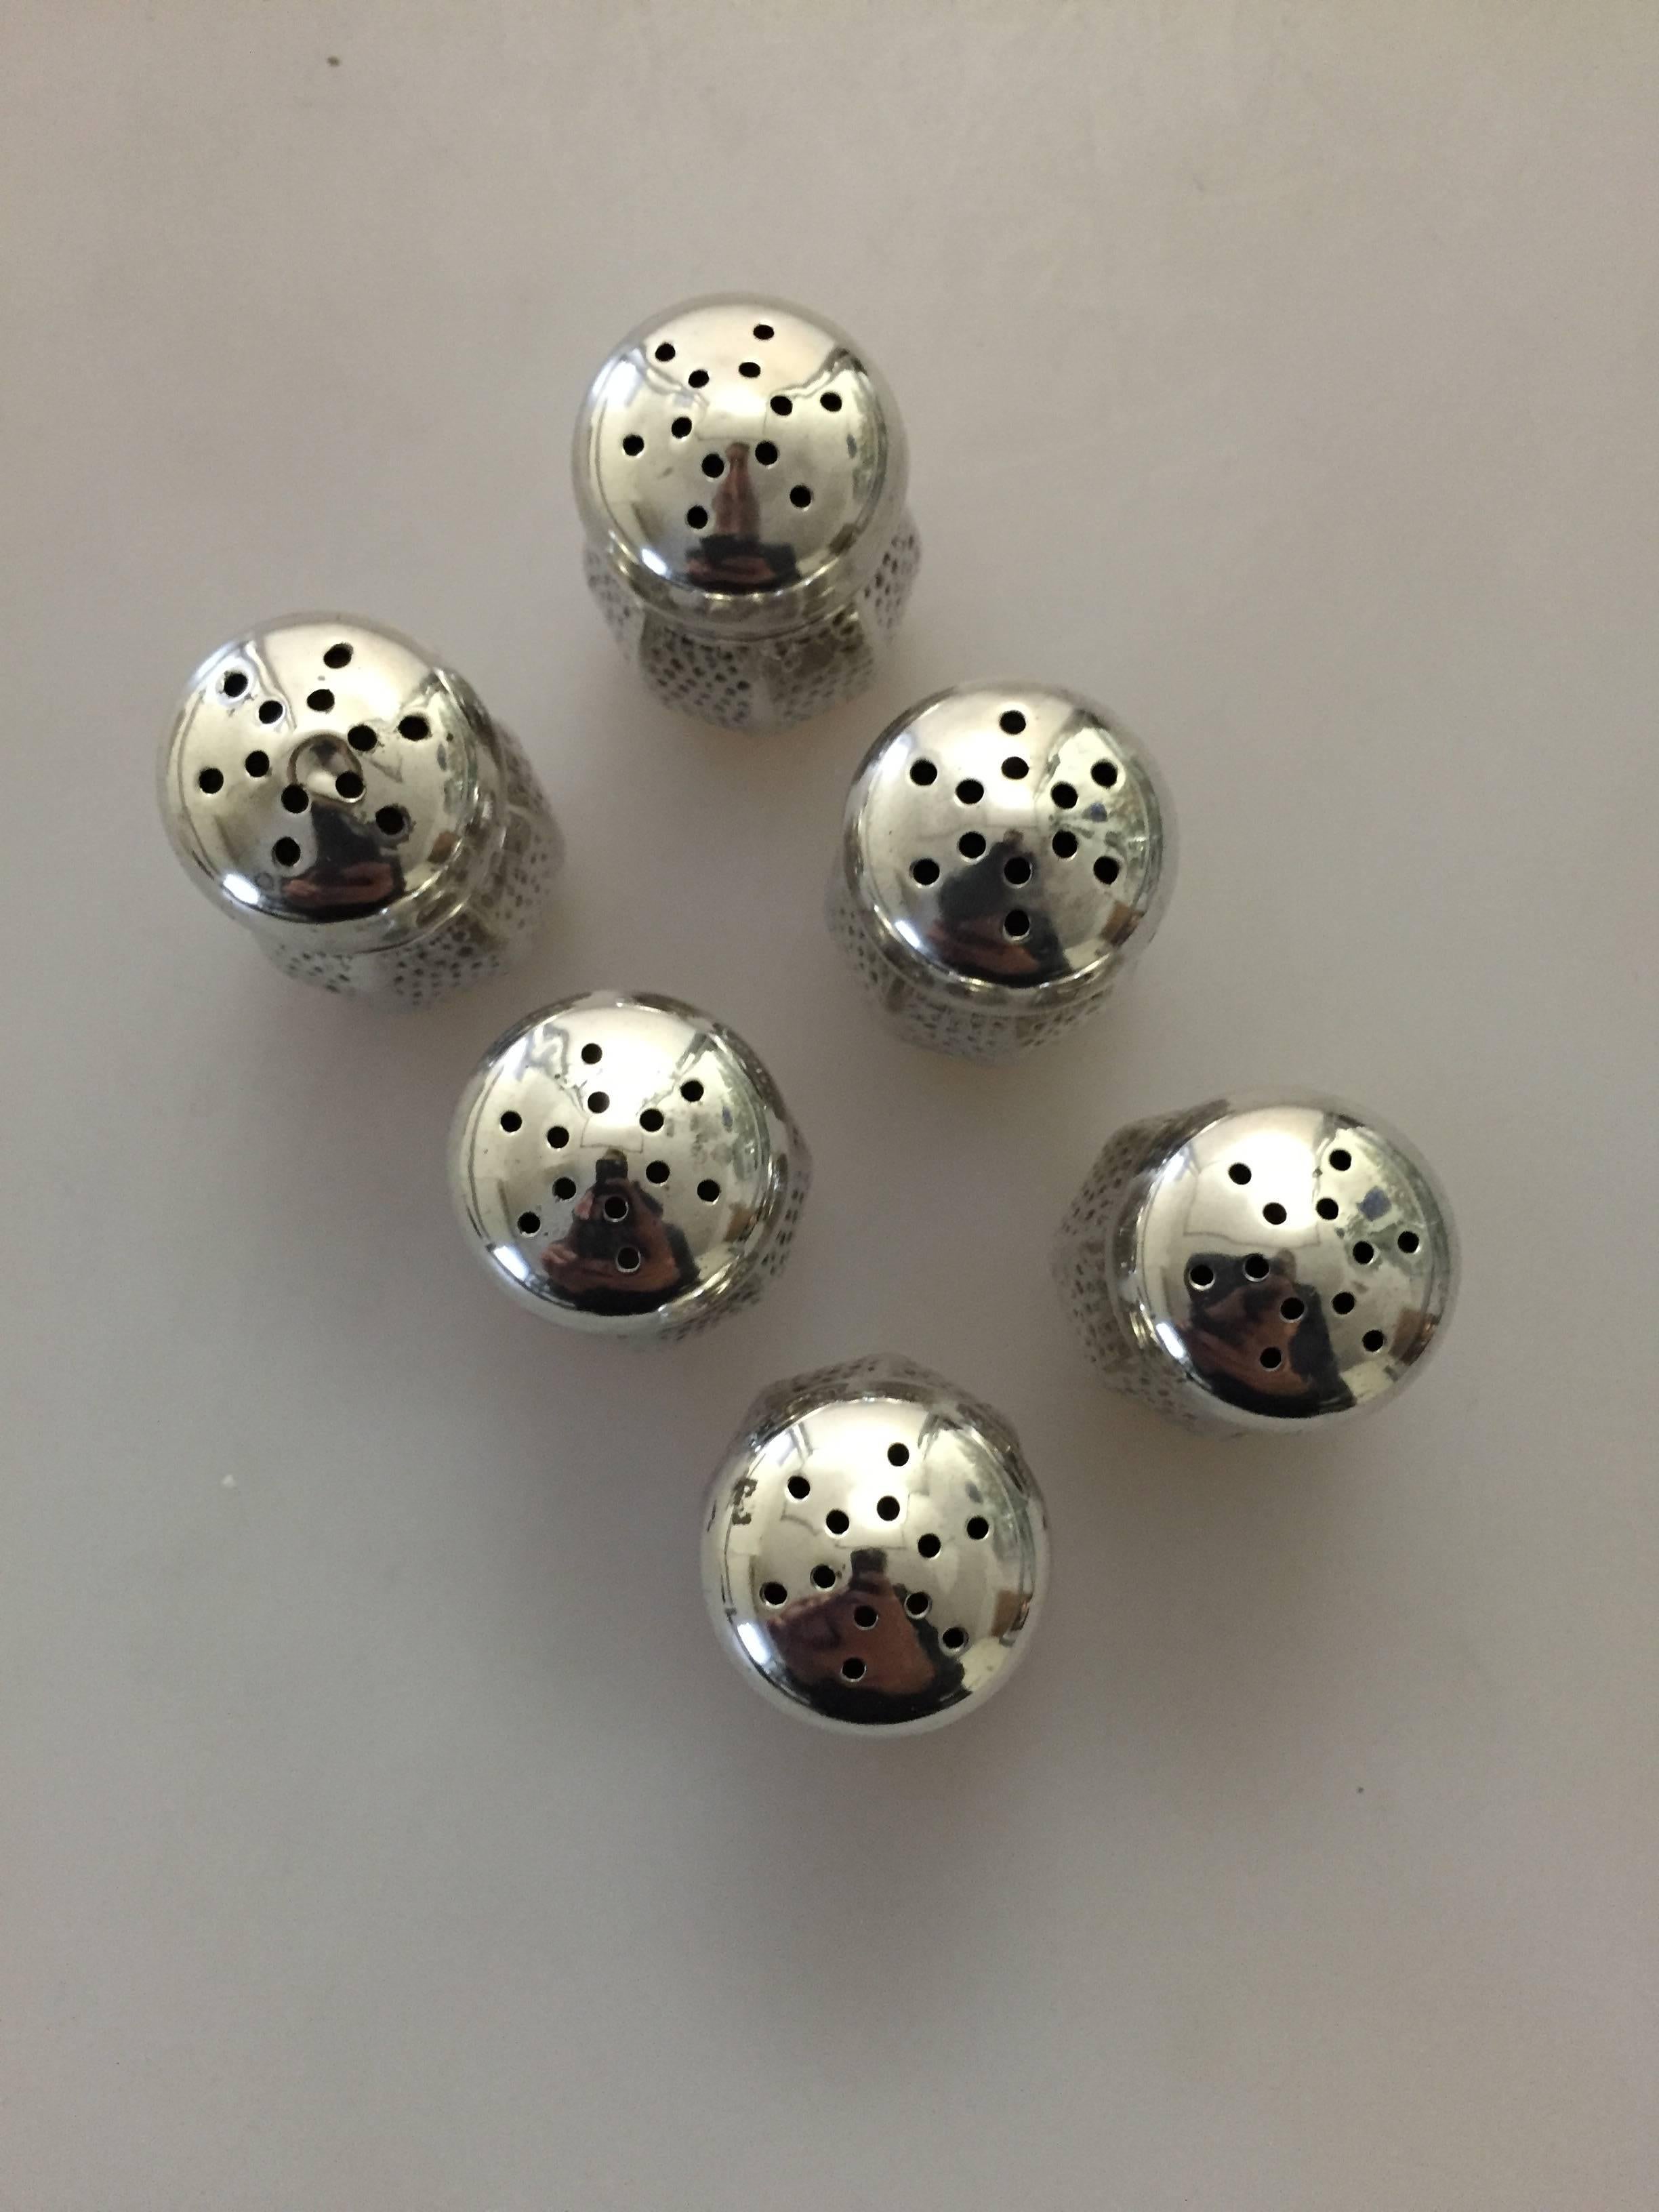 Set of six salt / pepper shakers in American sterling silver. 

Measures 3.5 cm tall (1 3/8